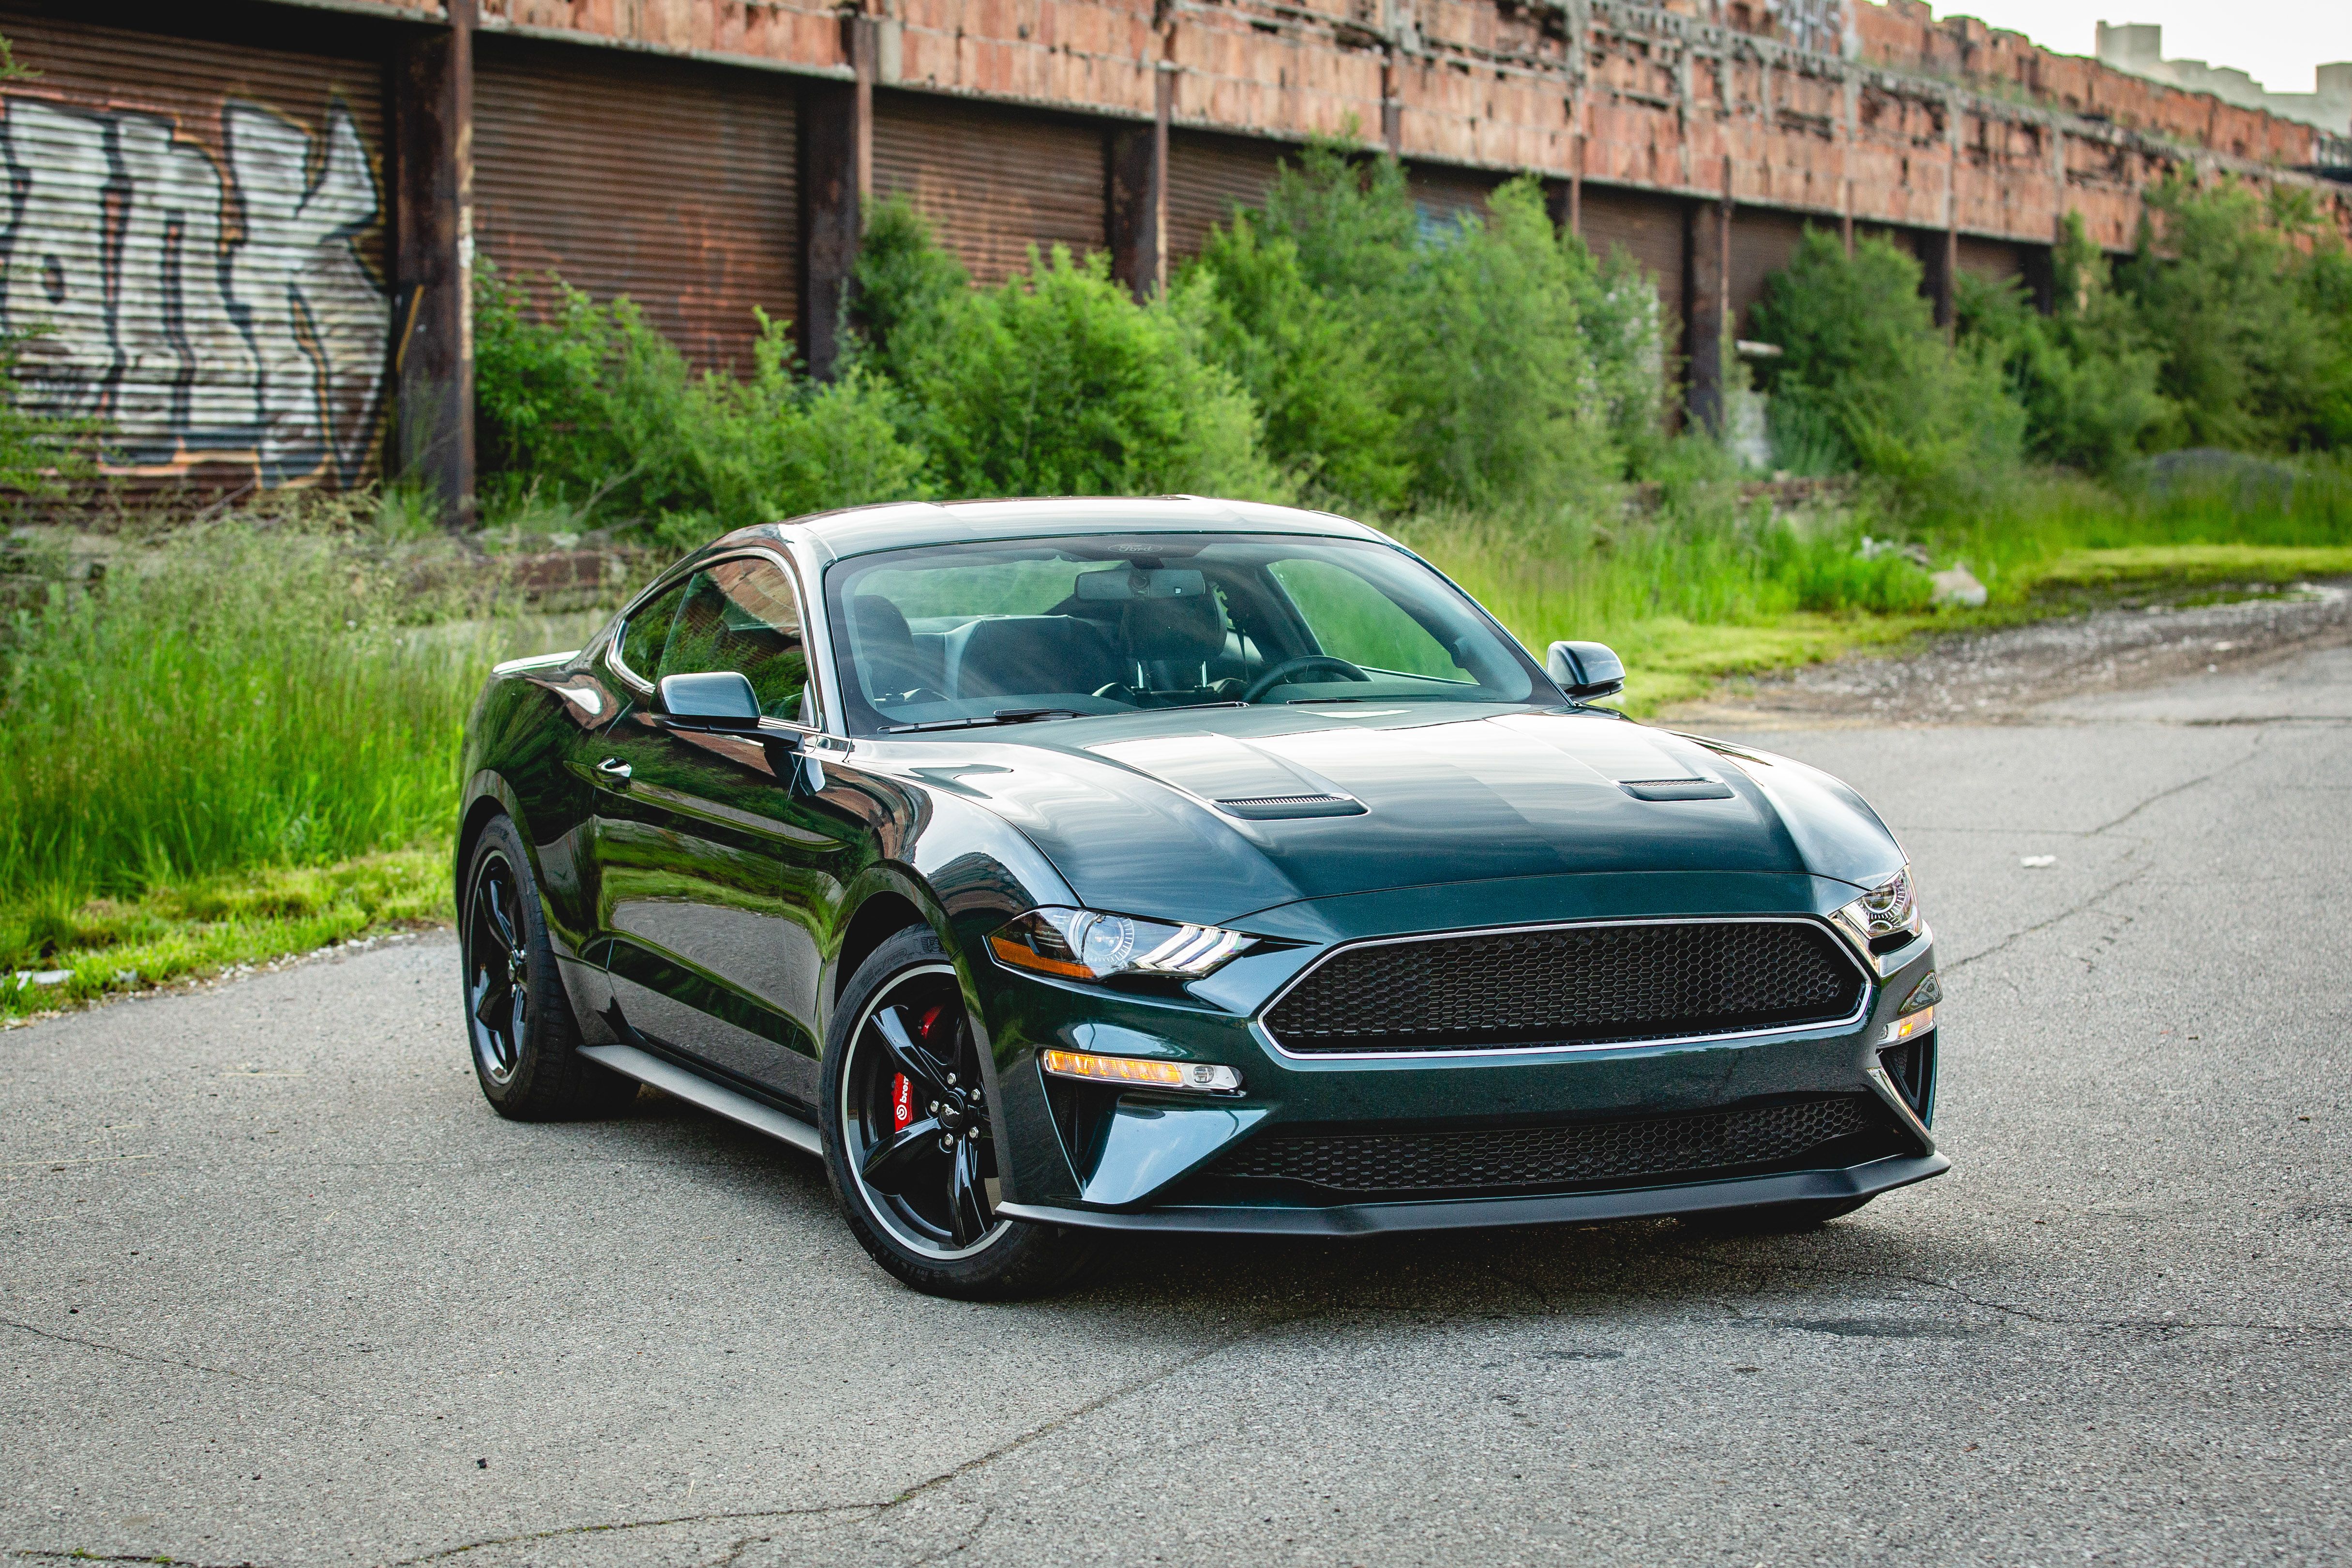 Comments on Our 2019 Ford Mustang Bullitt Enchants as a